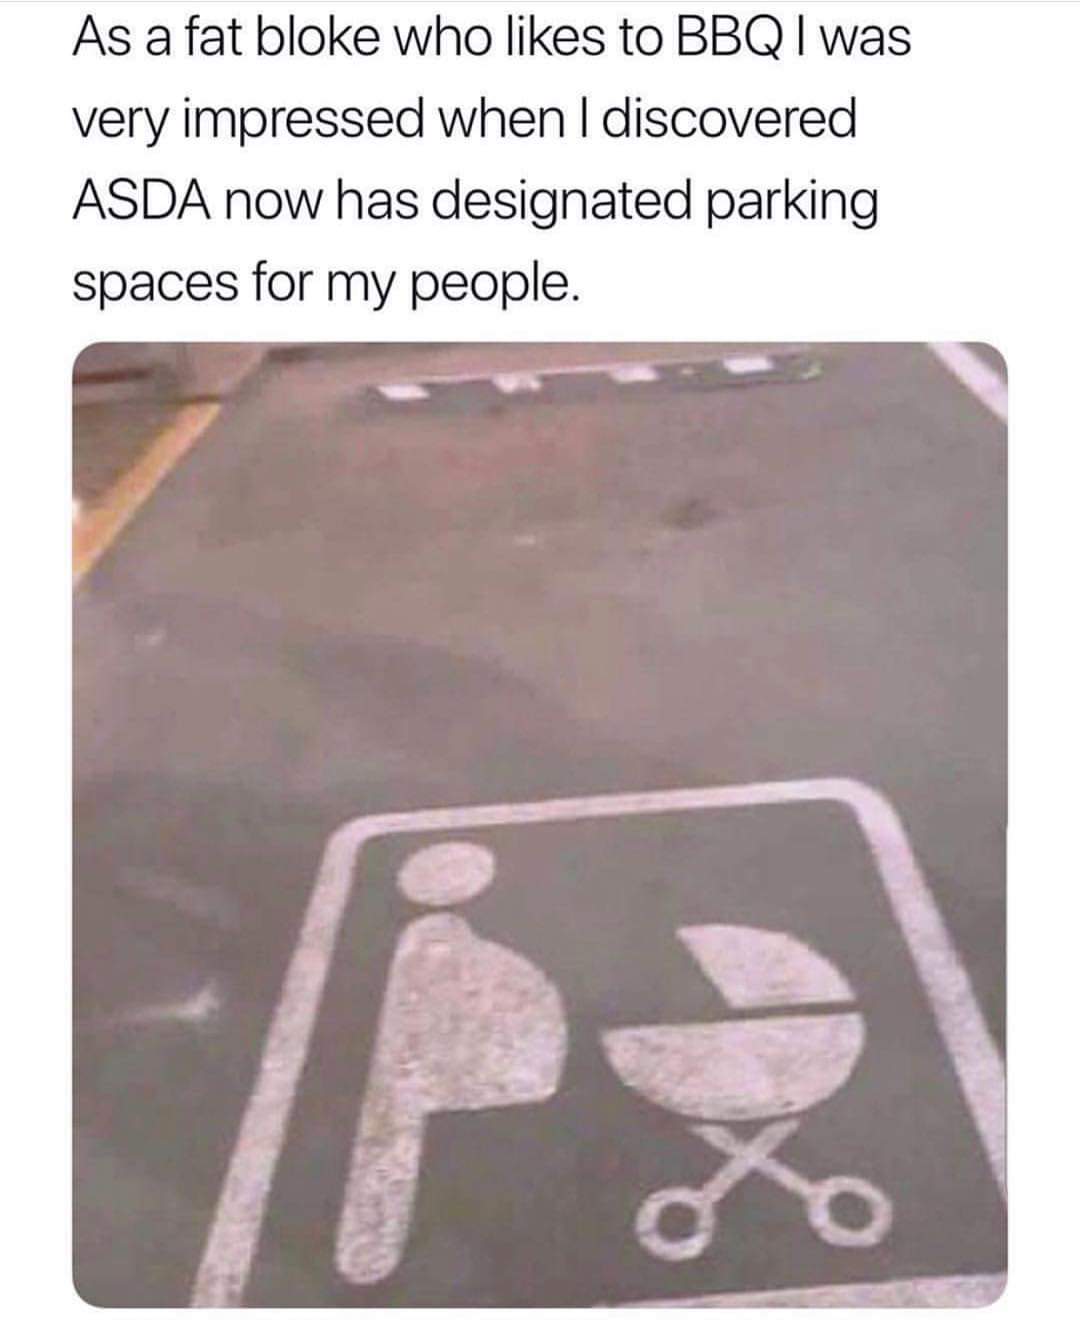 memes - fat guy grill parking - As a fat bloke who to Bbq I was very impressed when I discovered Asda now has designated parking spaces for my people.